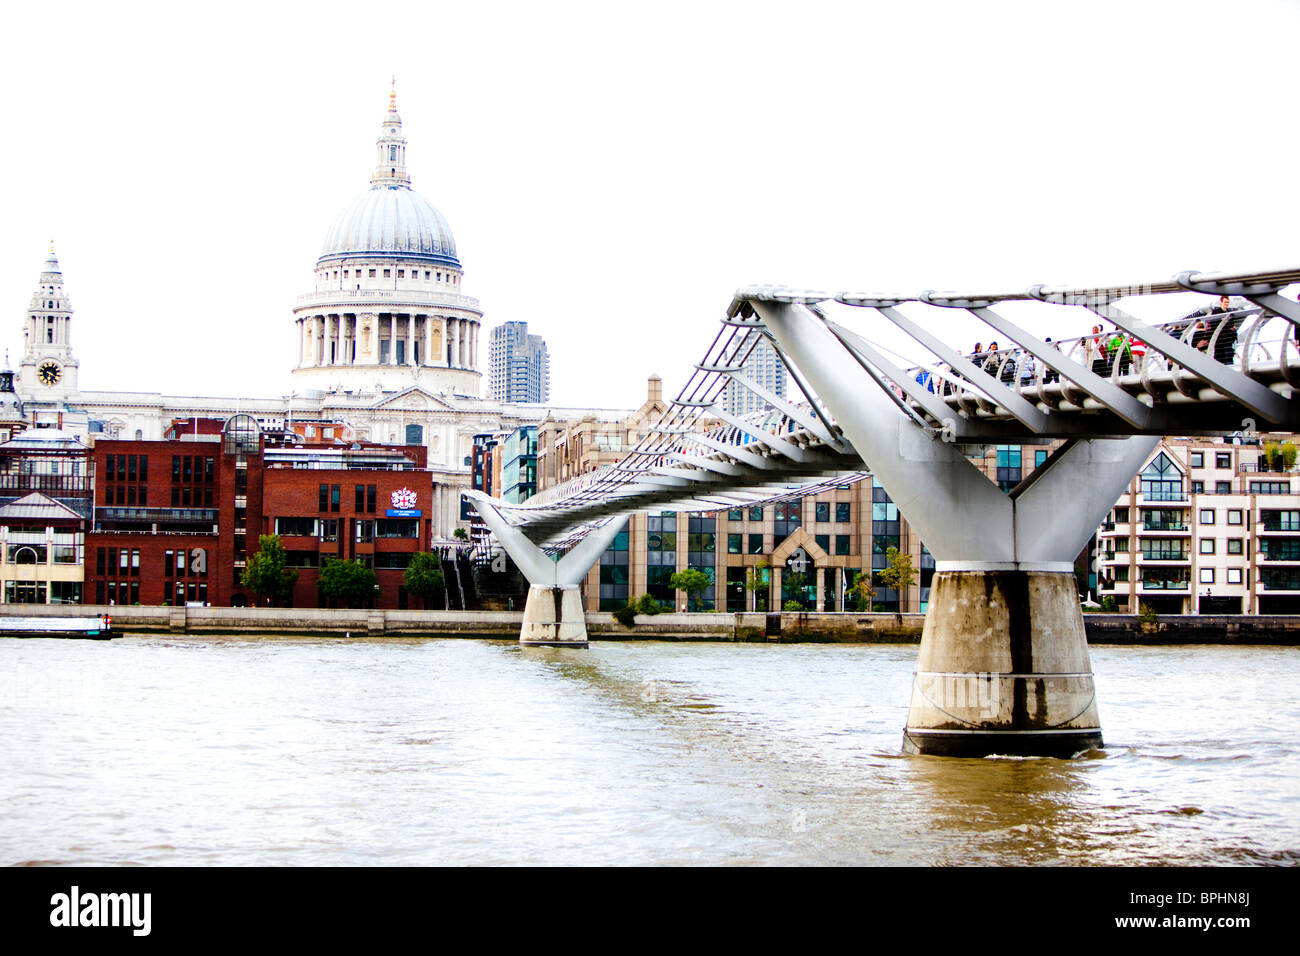 The Millennium Footbridge over the River Thames with St Paul's Cathedral in the background, London, England, UK Stock Photo